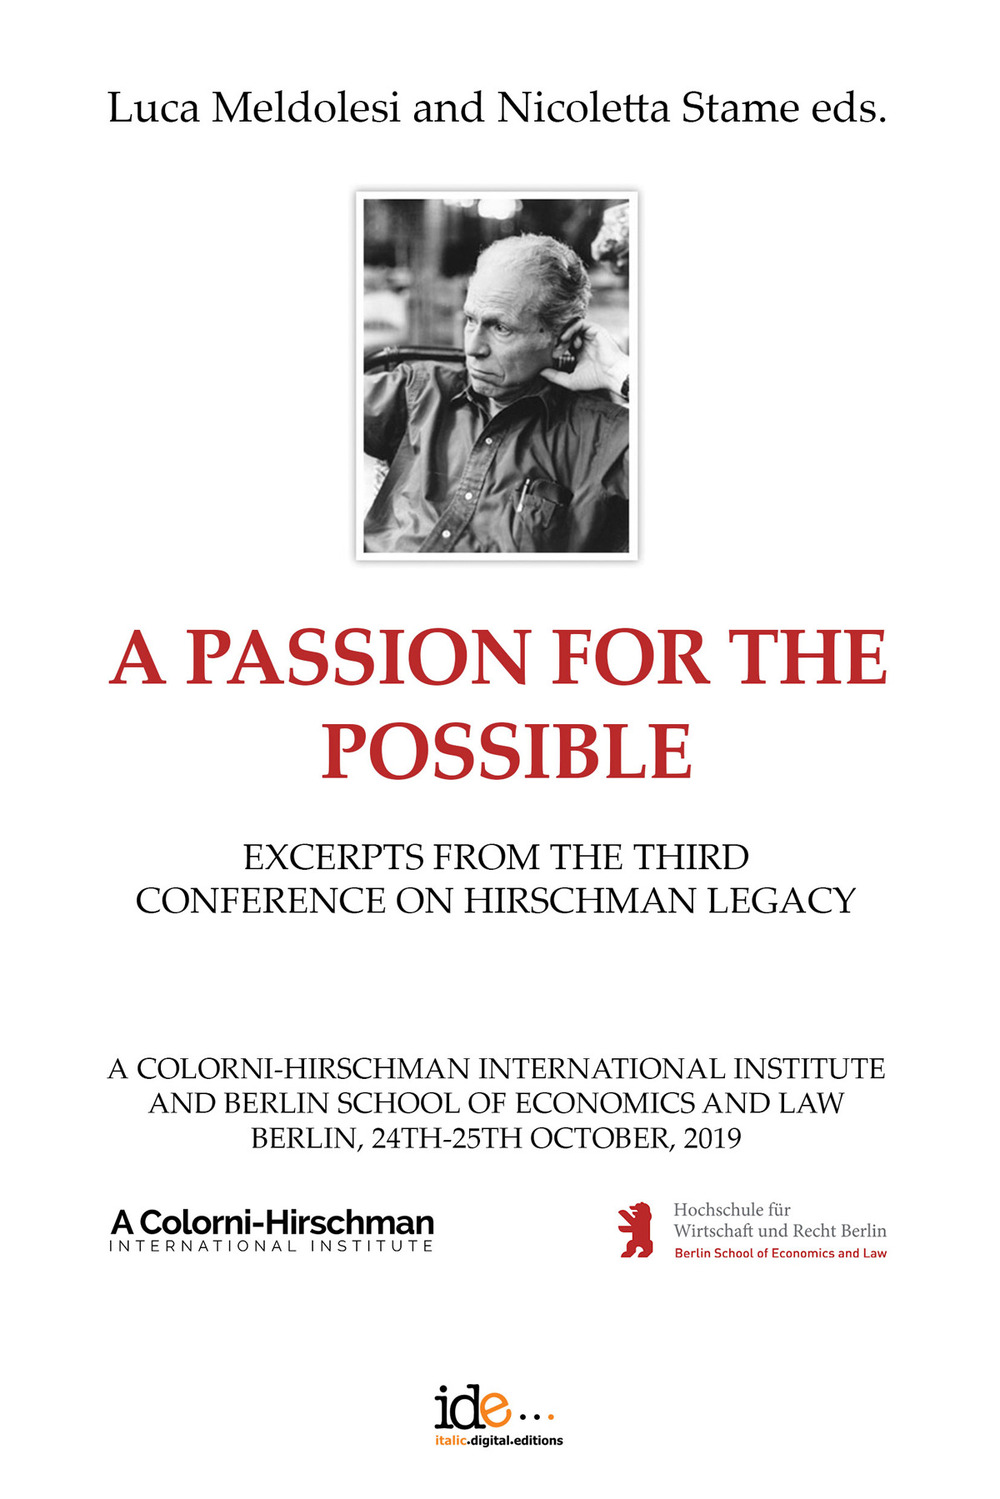 A passion for the possible. Excerpts from the third Conference on Hirschman legacy